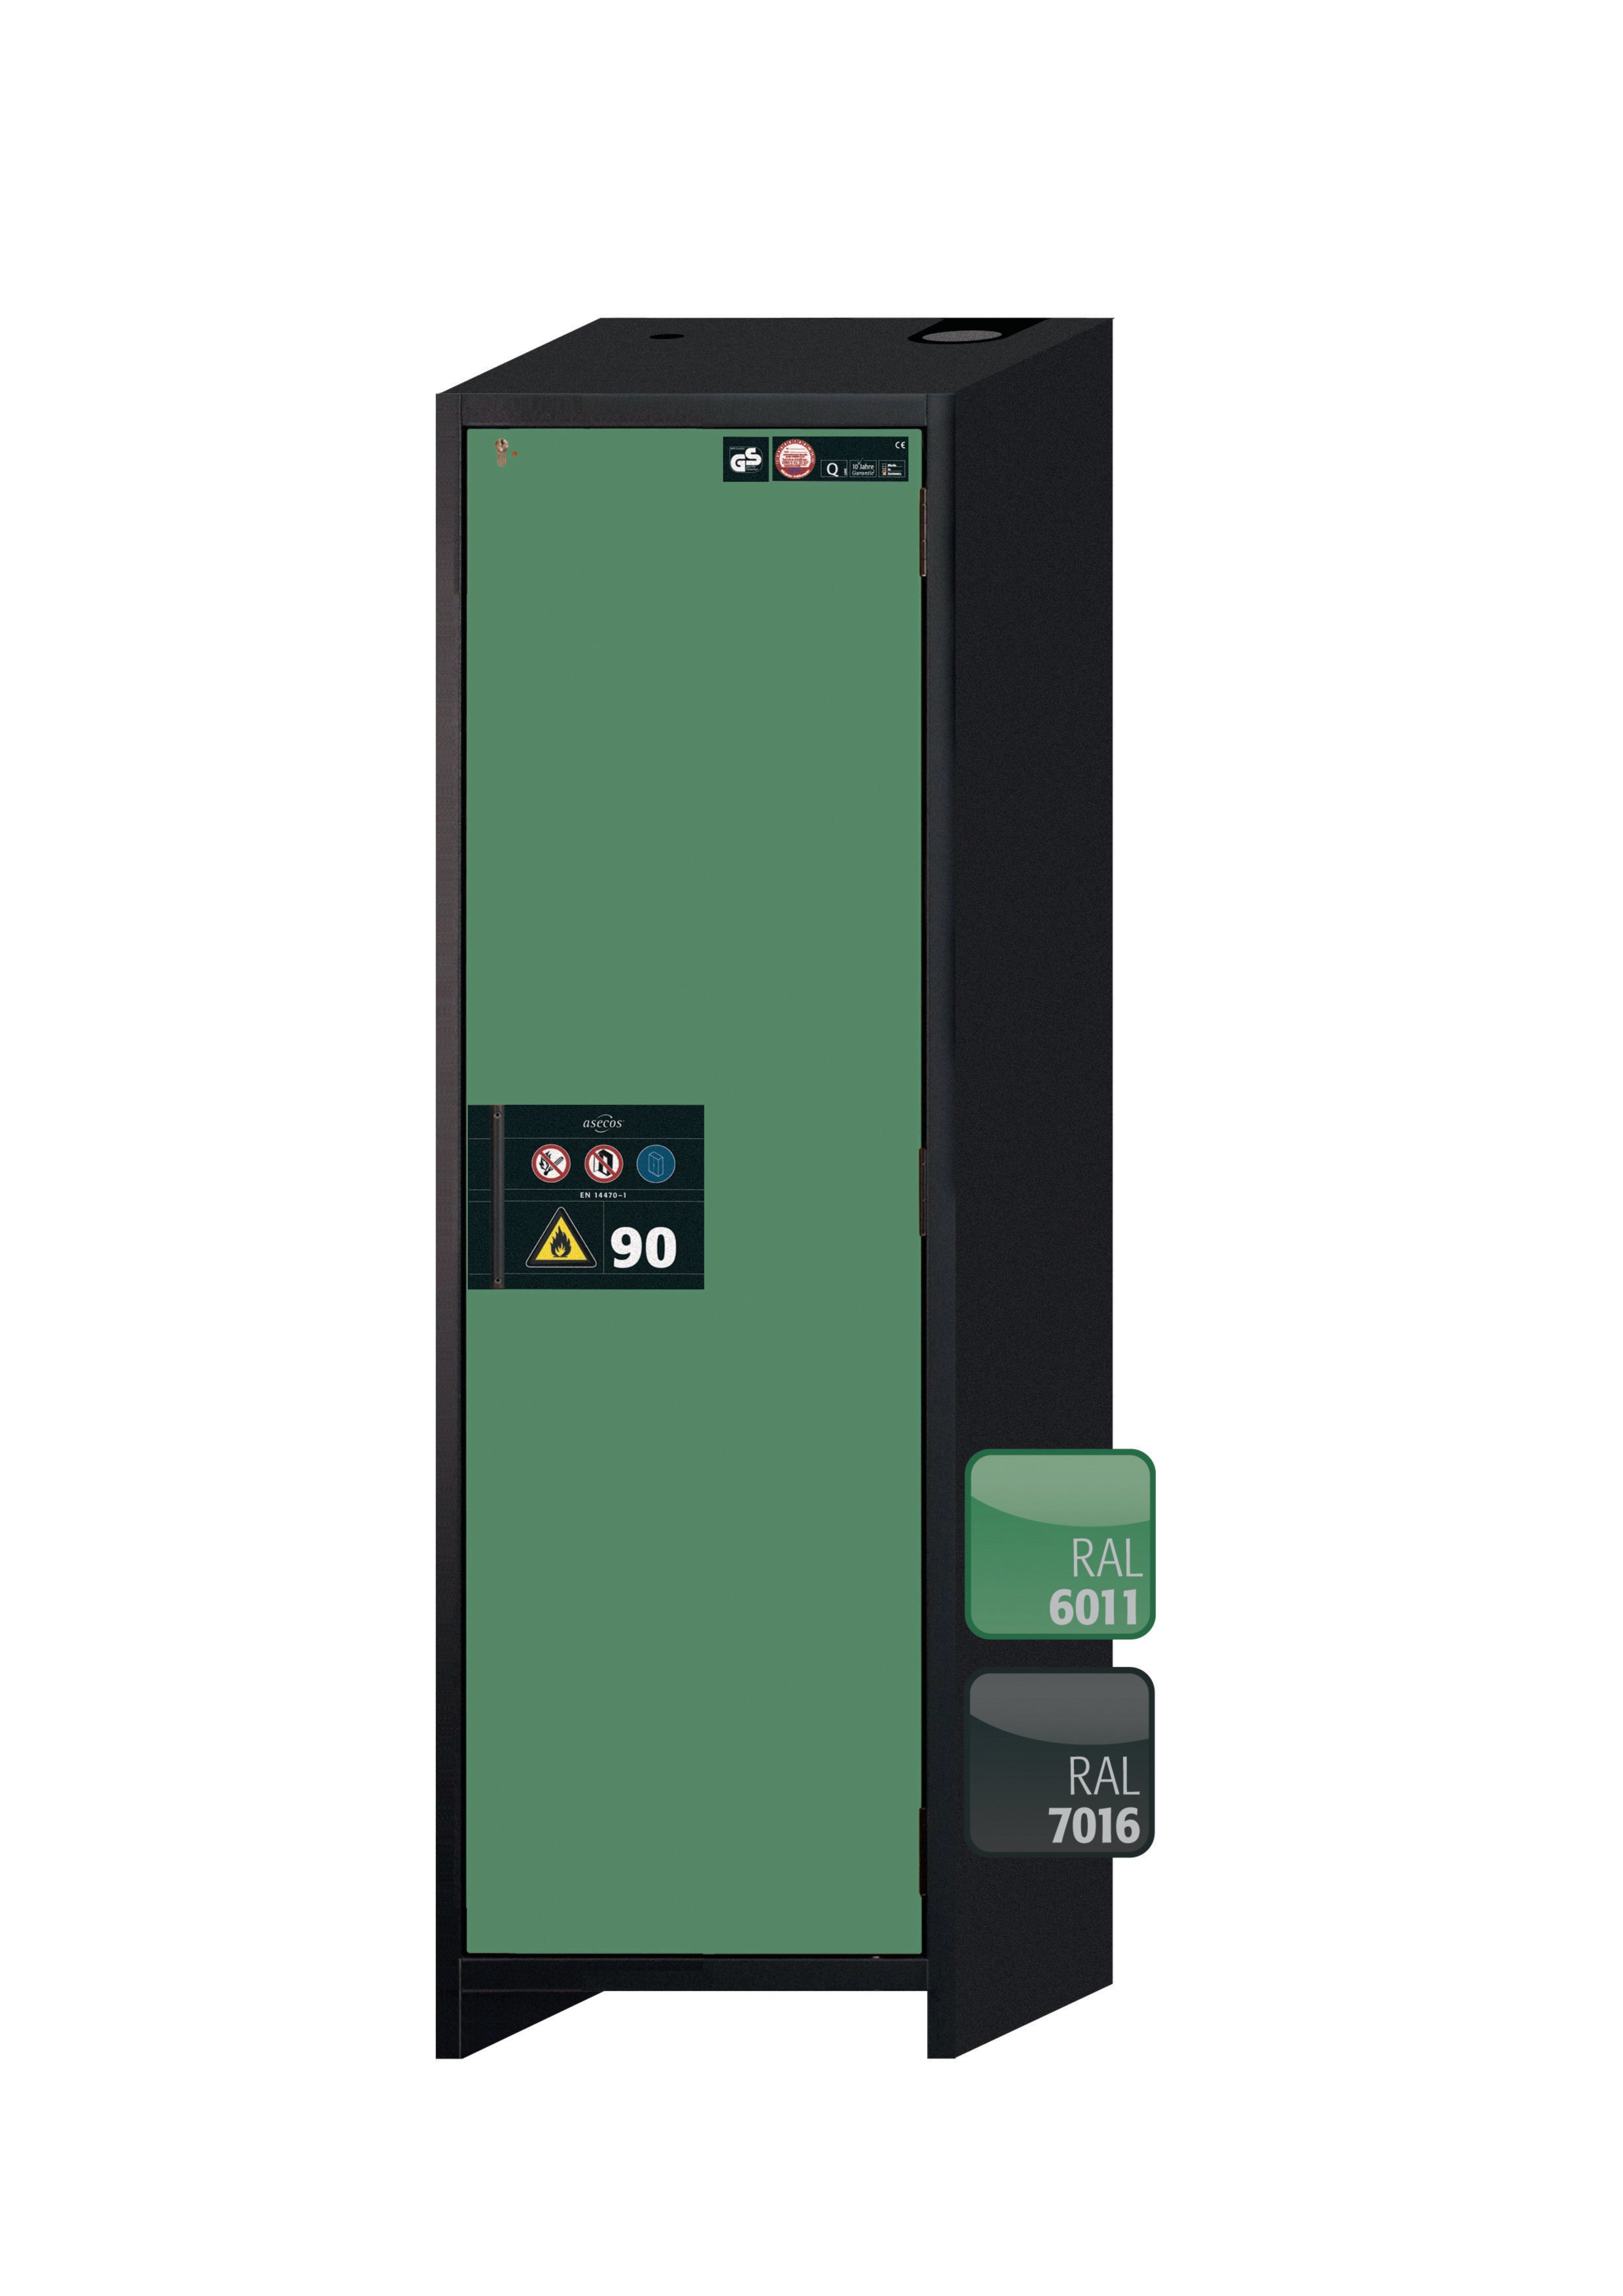 Type 90 safety storage cabinet Q-CLASSIC-90 model Q90.195.060.R in reseda green RAL 6011 with 2x shelf standard (stainless steel 1.4301),